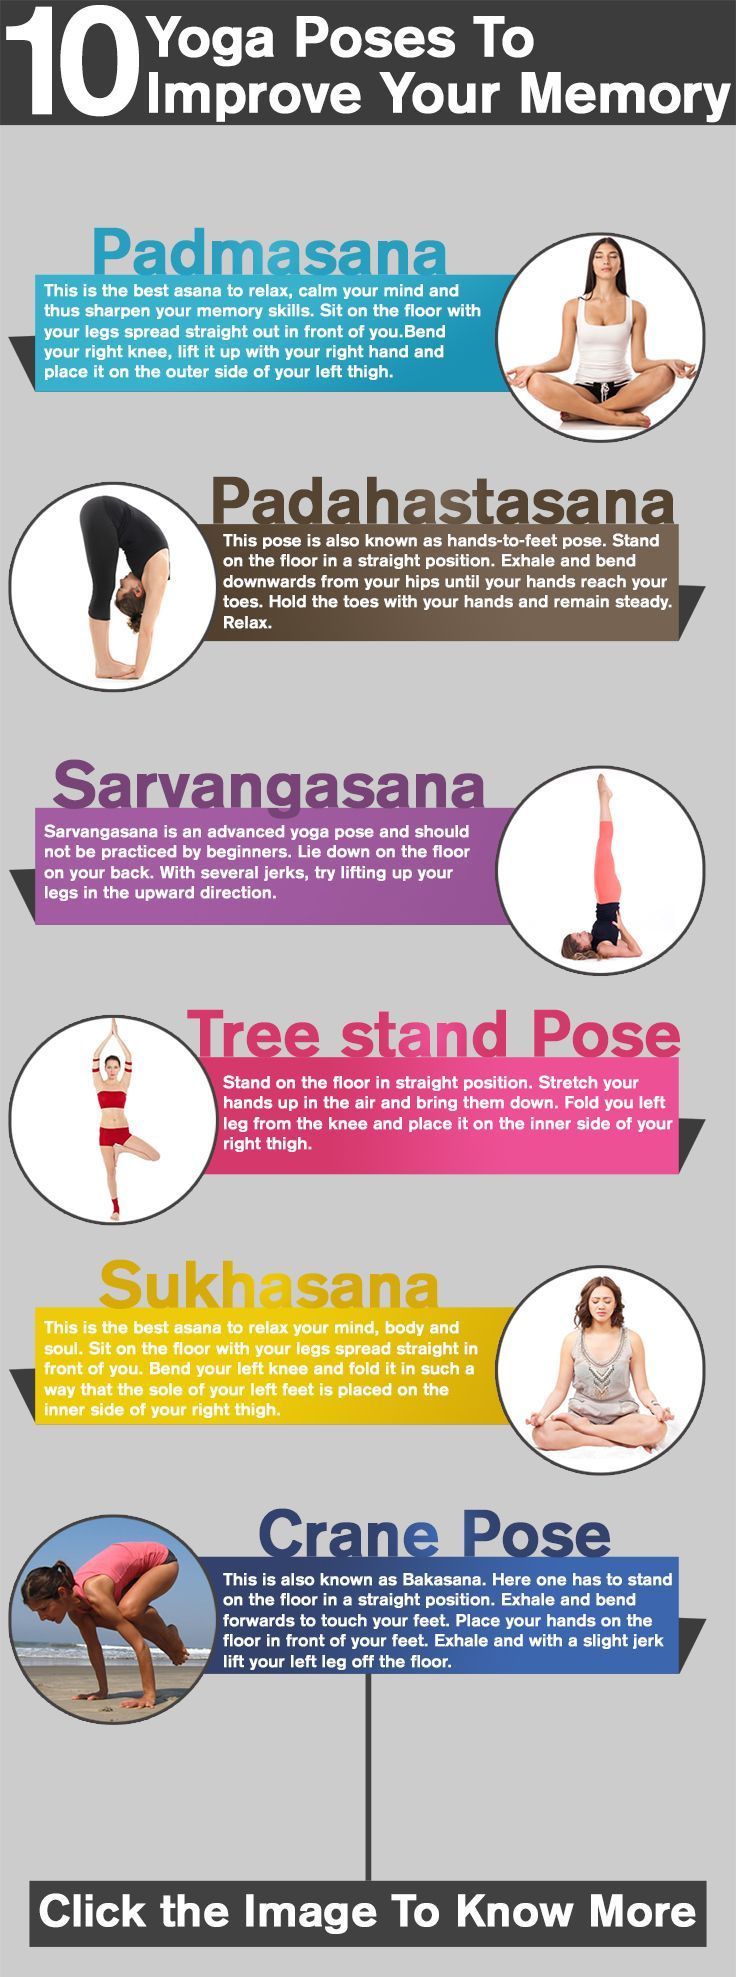 Here are some yoga for memory poses that will help.